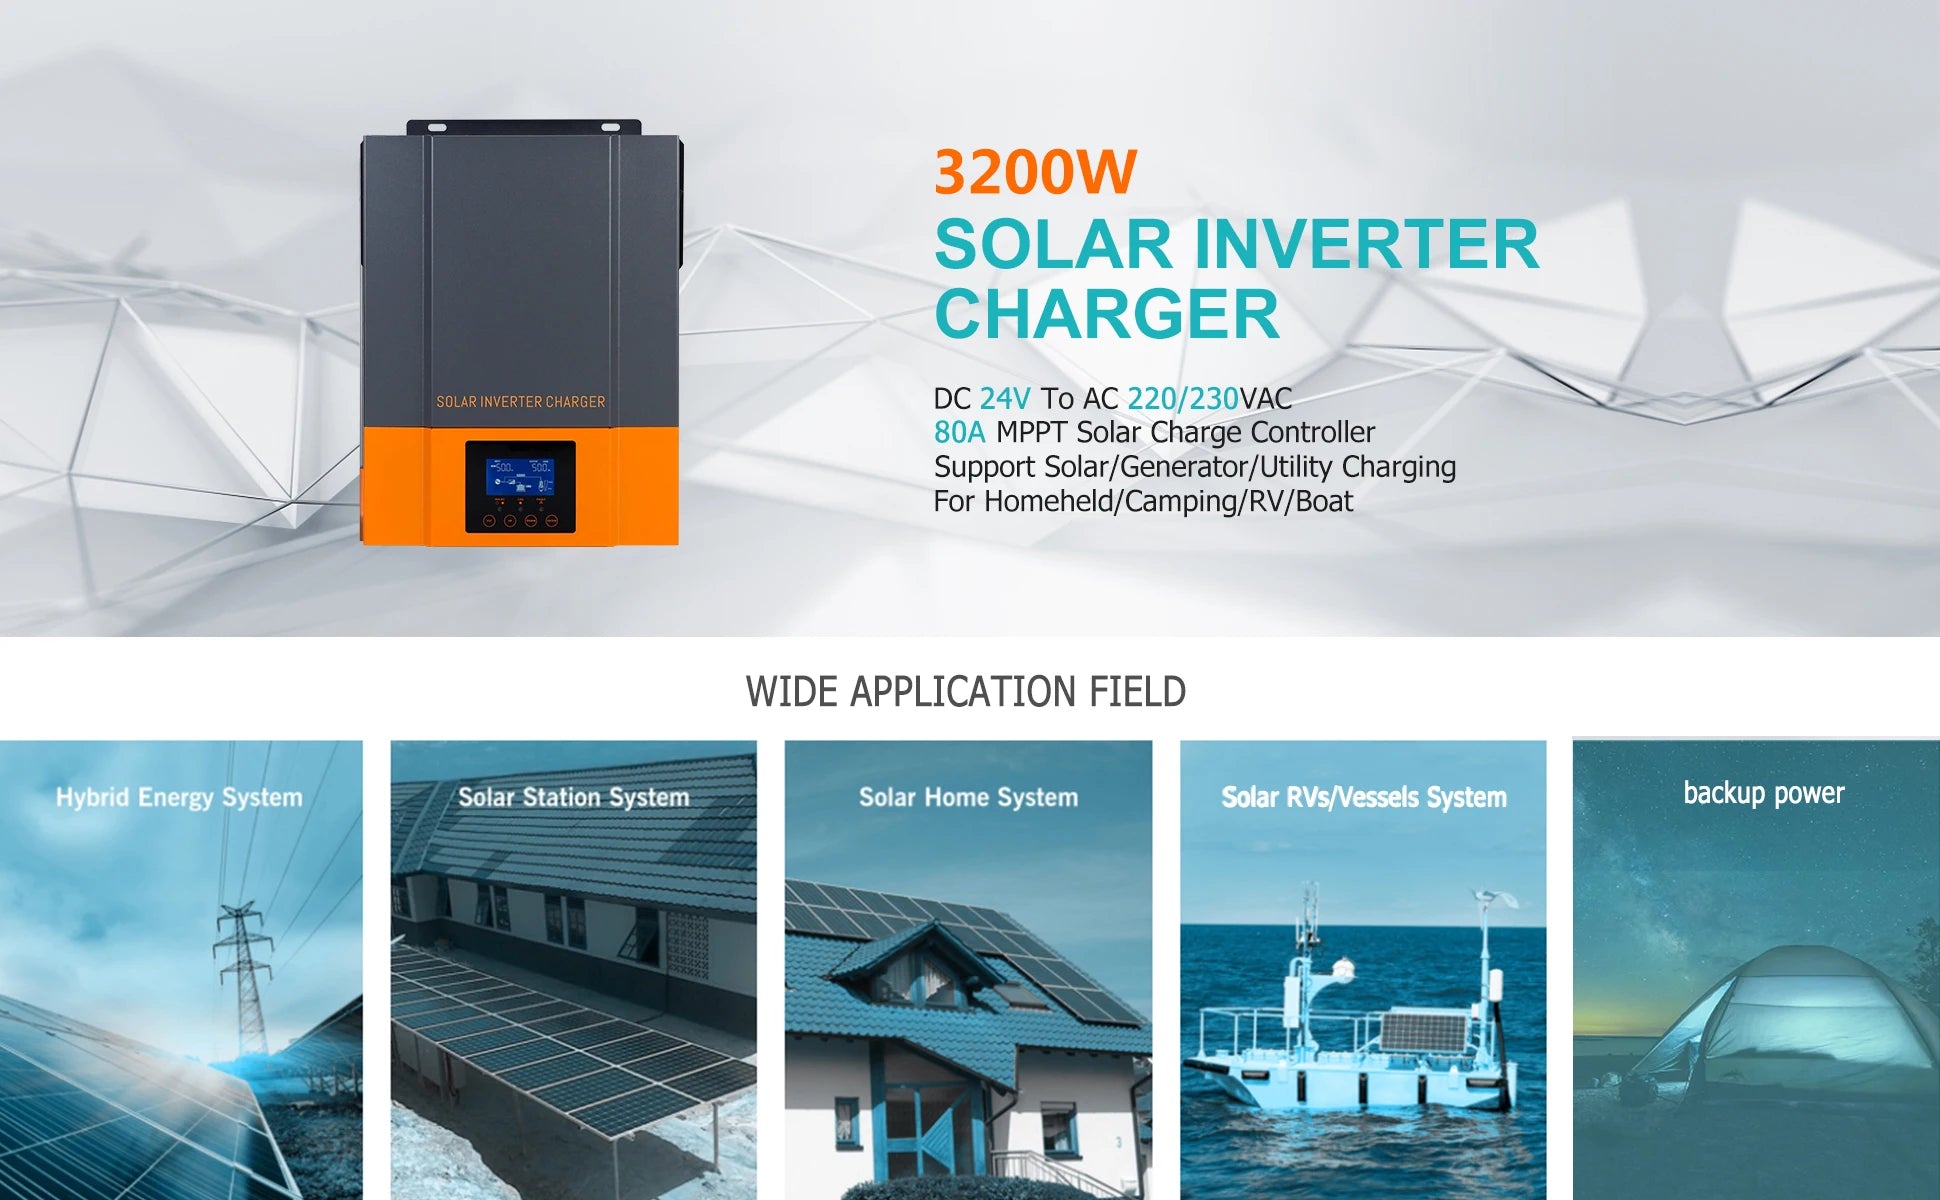 PowMr 1.5KW 2.4KW 3.2KW Hybrid Solar Inverter, Hybrid solar inverter charger converts DC power to AC for home, camping, RV, boat use with solar, gen, and utility charging.